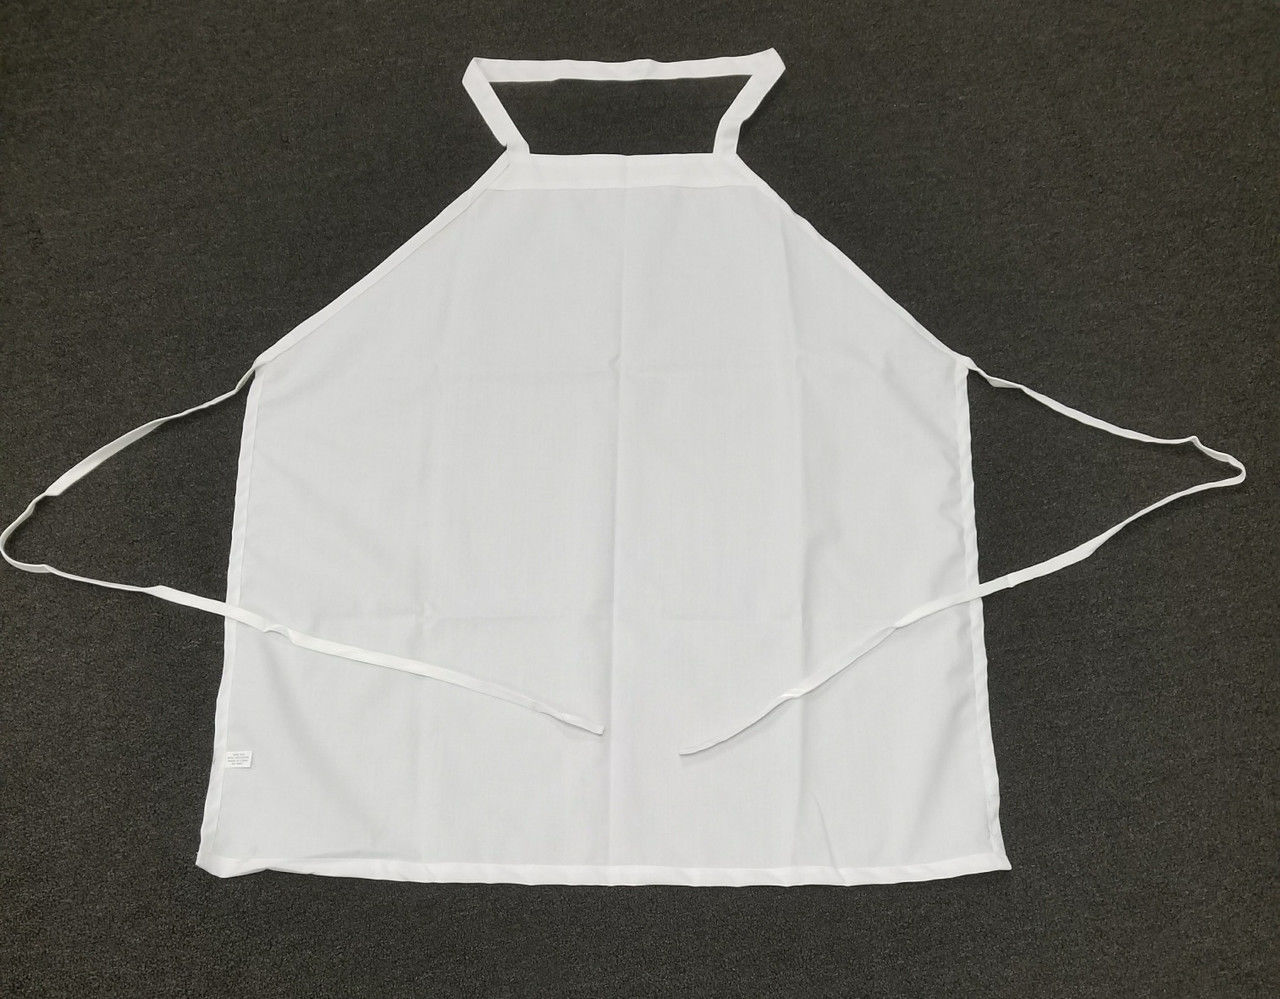 Are these white chef aprons ideal for any particular applications?